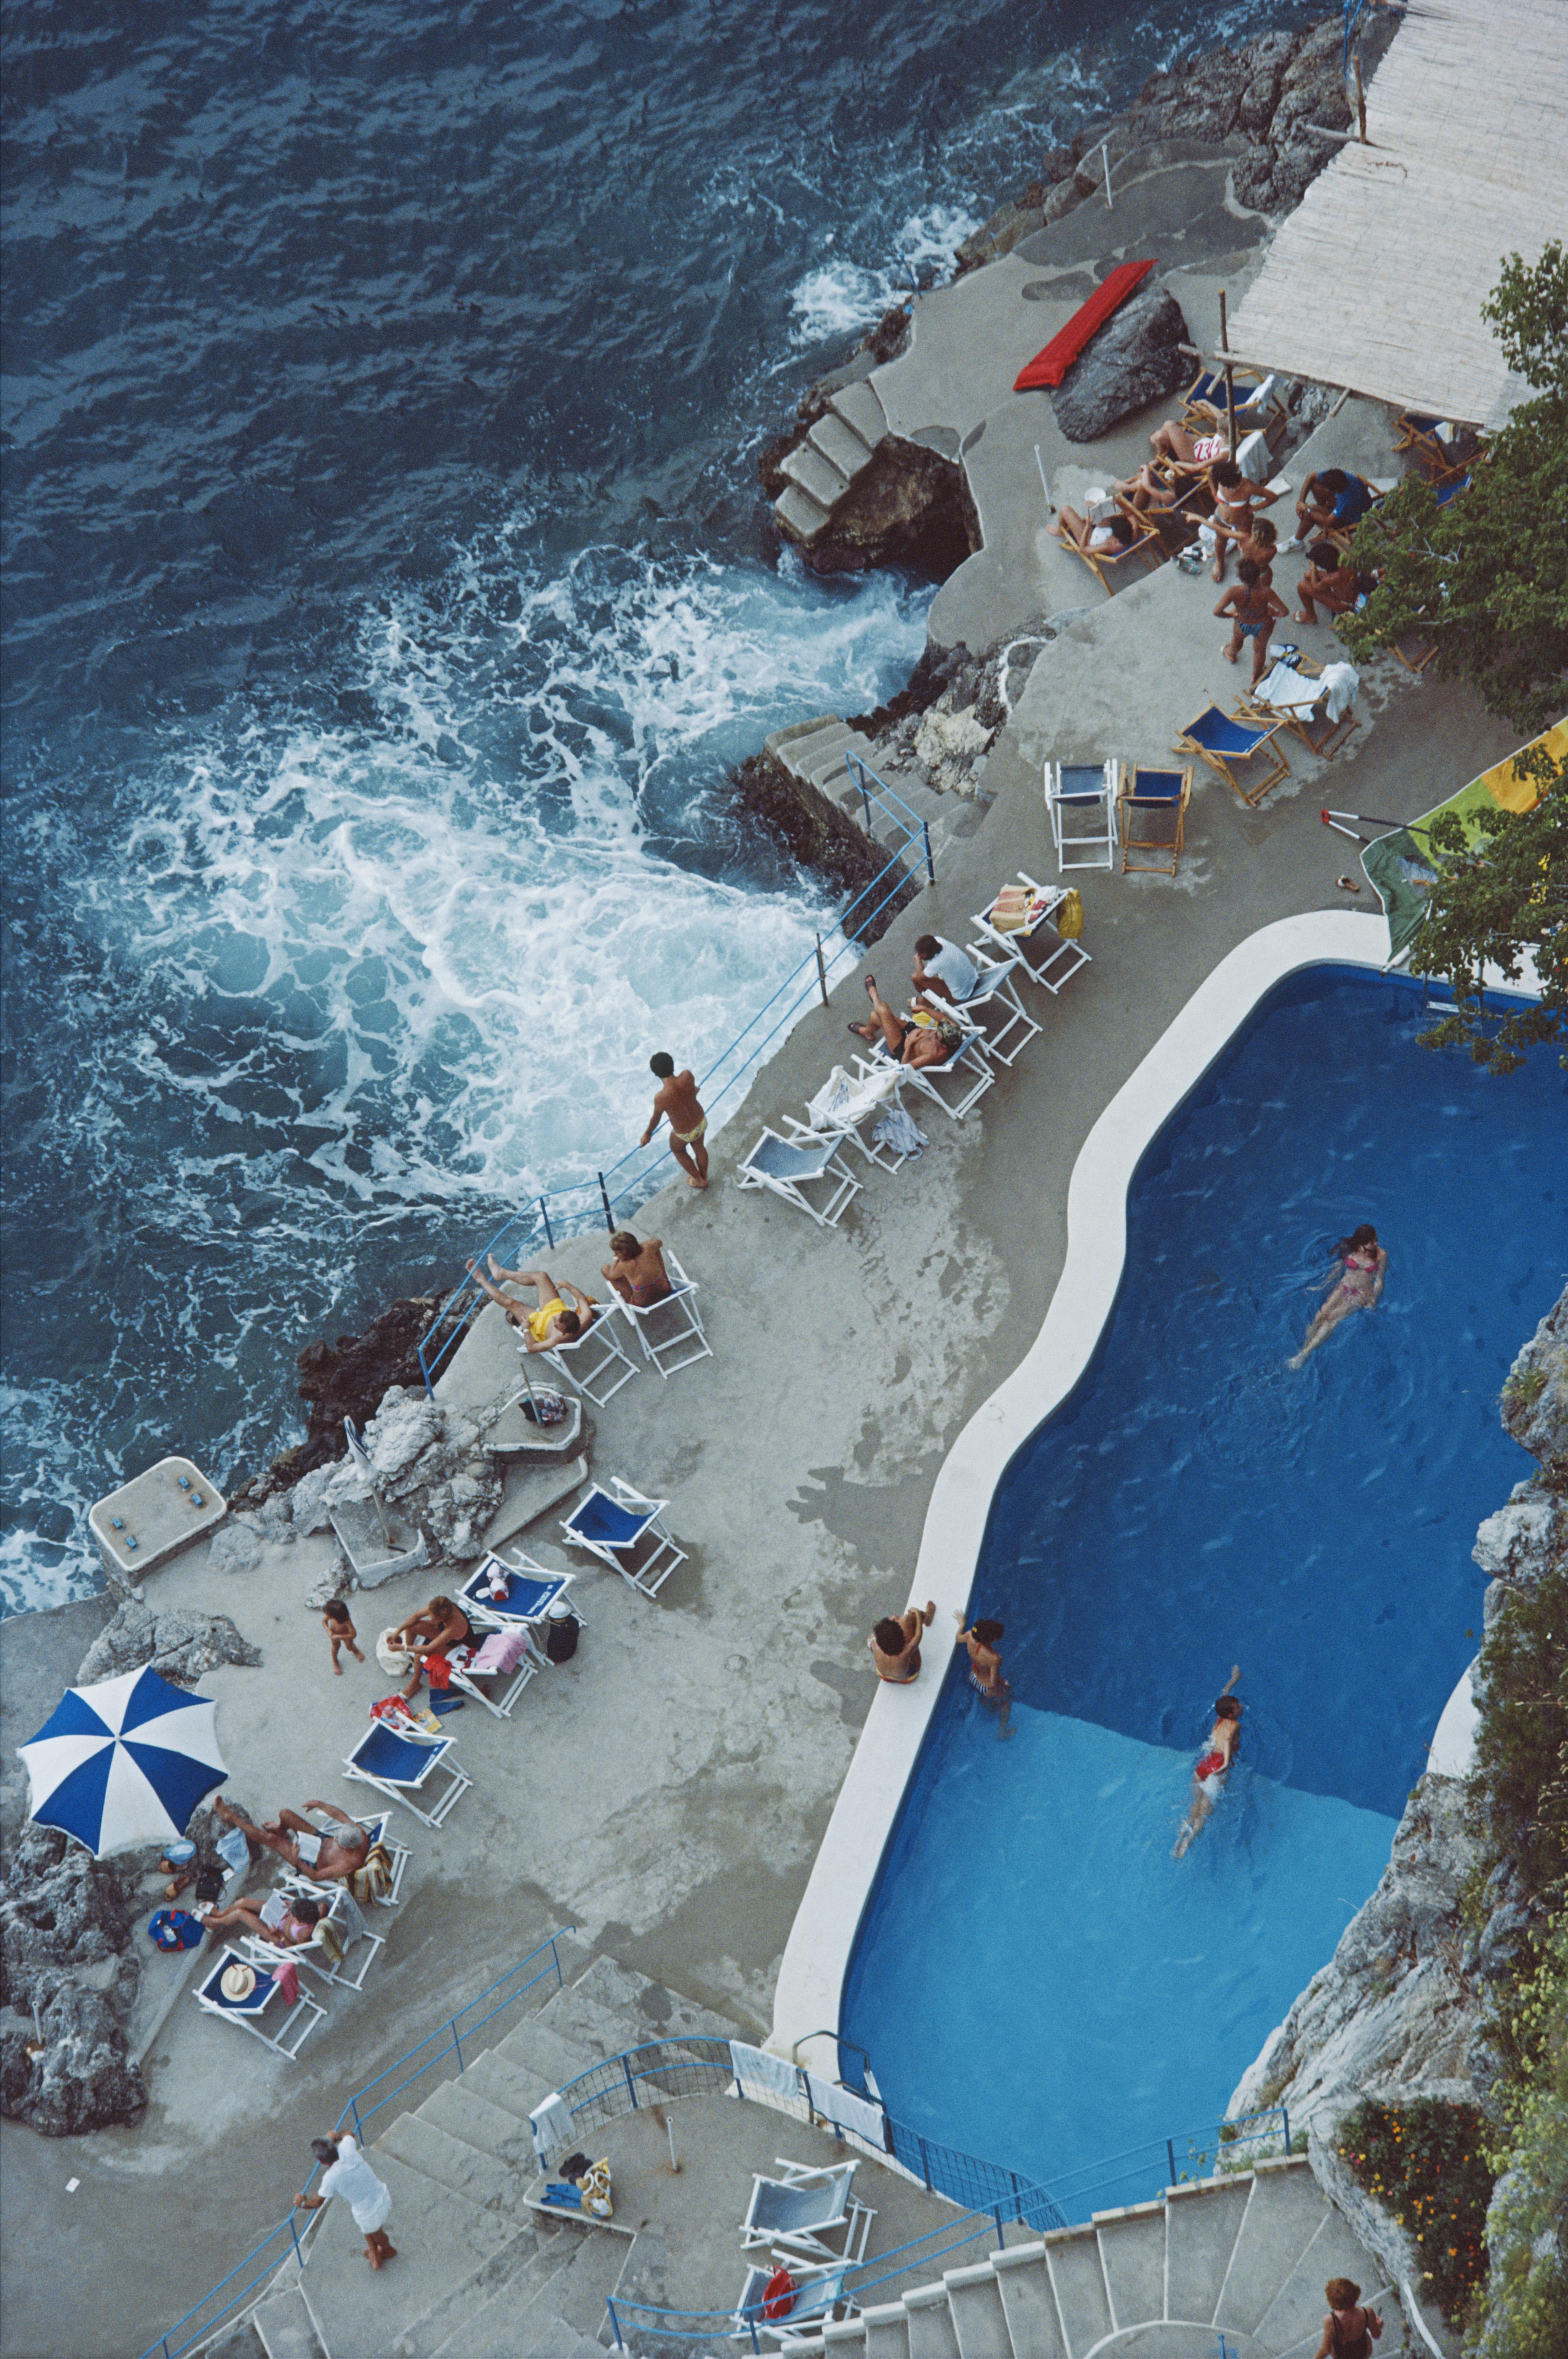 'Pool On Amalfi Coast' 1984 Slim Aarons Limited Estate Edition

A view of the seaside pool at the Hotel St. Caterina, Amalfi, Italy, September 1984. (Photo by Slim Aarons)

C Print
Produced from the original transparency
Certificate of authenticity